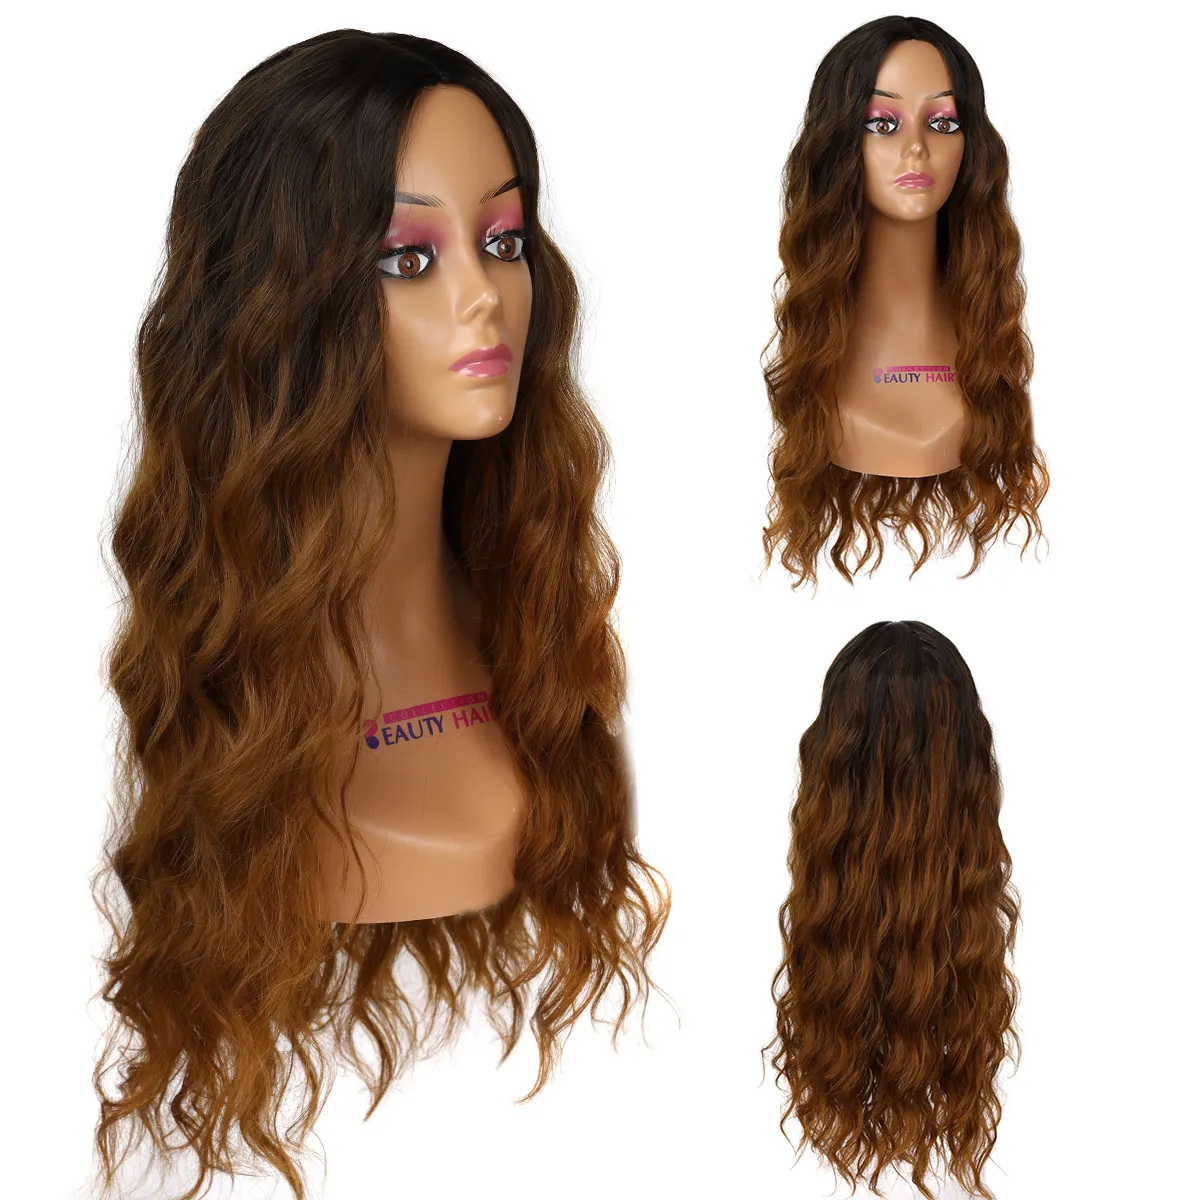 Synthetic Long Curly Hair Wigs 265G Black Brown Party Cosplay Daily Use Instagram Trends For Girls Lolita Natural Wavy Wig